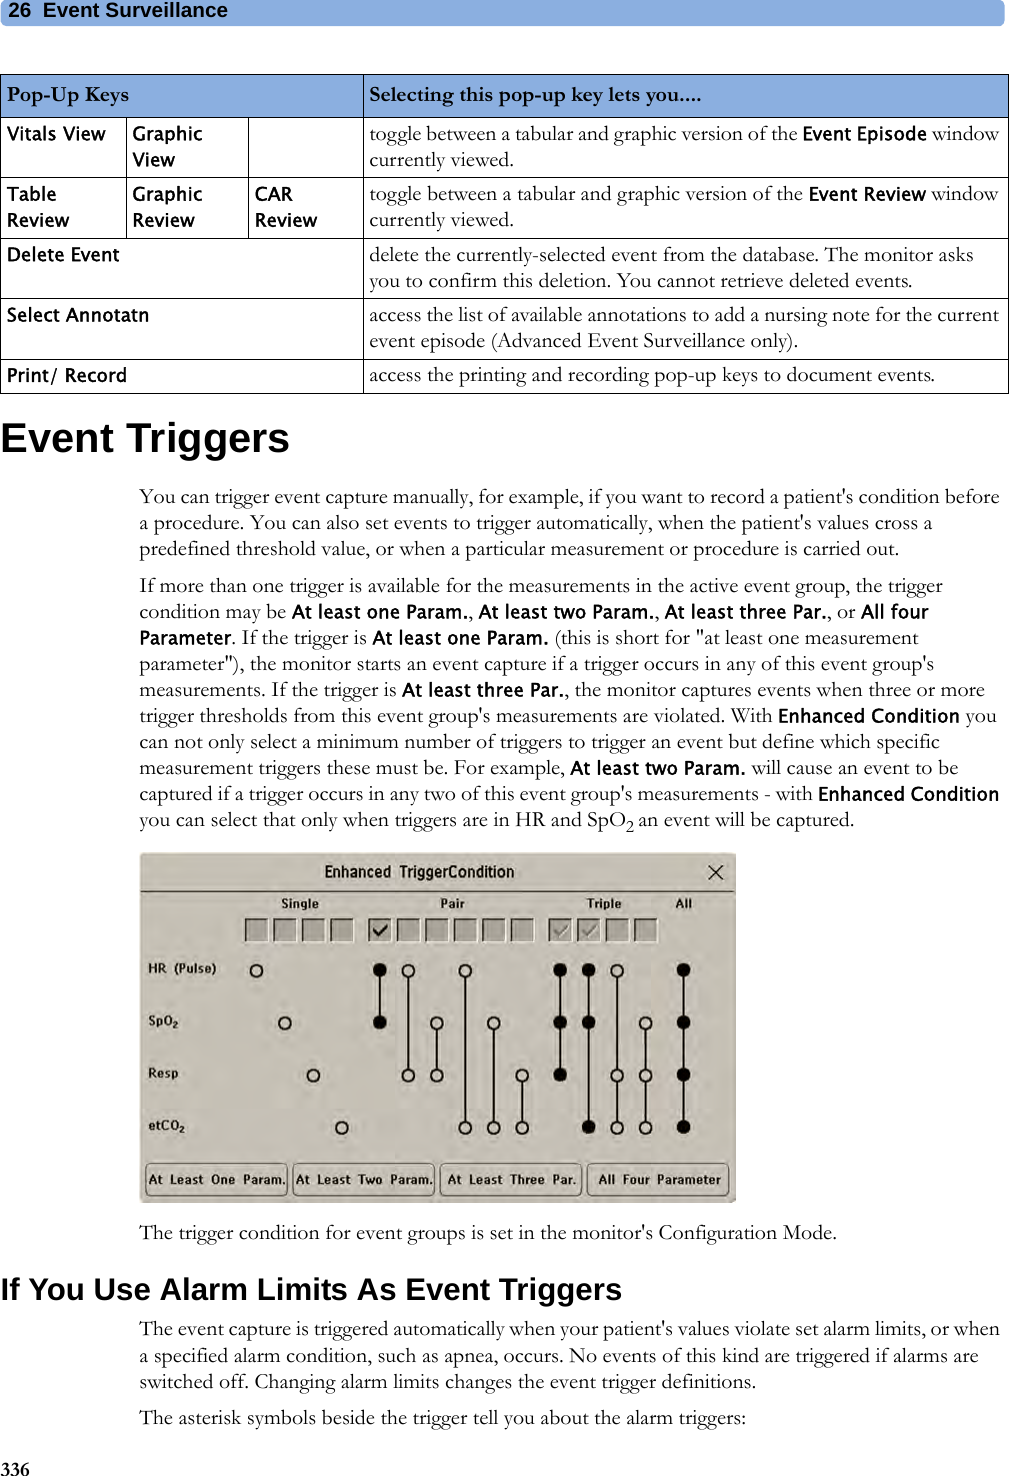 26 Event Surveillance336Event TriggersYou can trigger event capture manually, for example, if you want to record a patient&apos;s condition before a procedure. You can also set events to trigger automatically, when the patient&apos;s values cross a predefined threshold value, or when a particular measurement or procedure is carried out.If more than one trigger is available for the measurements in the active event group, the trigger condition may be At least one Param., At least two Param., At least three Par., or All four Parameter. If the trigger is At least one Param. (this is short for &quot;at least one measurement parameter&quot;), the monitor starts an event capture if a trigger occurs in any of this event group&apos;s measurements. If the trigger is At least three Par., the monitor captures events when three or more trigger thresholds from this event group&apos;s measurements are violated. With Enhanced Condition you can not only select a minimum number of triggers to trigger an event but define which specific measurement triggers these must be. For example, At least two Param. will cause an event to be captured if a trigger occurs in any two of this event group&apos;s measurements - with Enhanced Condition you can select that only when triggers are in HR and SpO2 an event will be captured.The trigger condition for event groups is set in the monitor&apos;s Configuration Mode.If You Use Alarm Limits As Event TriggersThe event capture is triggered automatically when your patient&apos;s values violate set alarm limits, or when a specified alarm condition, such as apnea, occurs. No events of this kind are triggered if alarms are switched off. Changing alarm limits changes the event trigger definitions.The asterisk symbols beside the trigger tell you about the alarm triggers:Vitals View Graphic Viewtoggle between a tabular and graphic version of the Event Episode window currently viewed.Table ReviewGraphic ReviewCAR Reviewtoggle between a tabular and graphic version of the Event Review window currently viewed.Delete Event delete the currently-selected event from the database. The monitor asks you to confirm this deletion. You cannot retrieve deleted events.Select Annotatn access the list of available annotations to add a nursing note for the current event episode (Advanced Event Surveillance only).Print/ Record access the printing and recording pop-up keys to document events.Pop-Up Keys Selecting this pop-up key lets you....